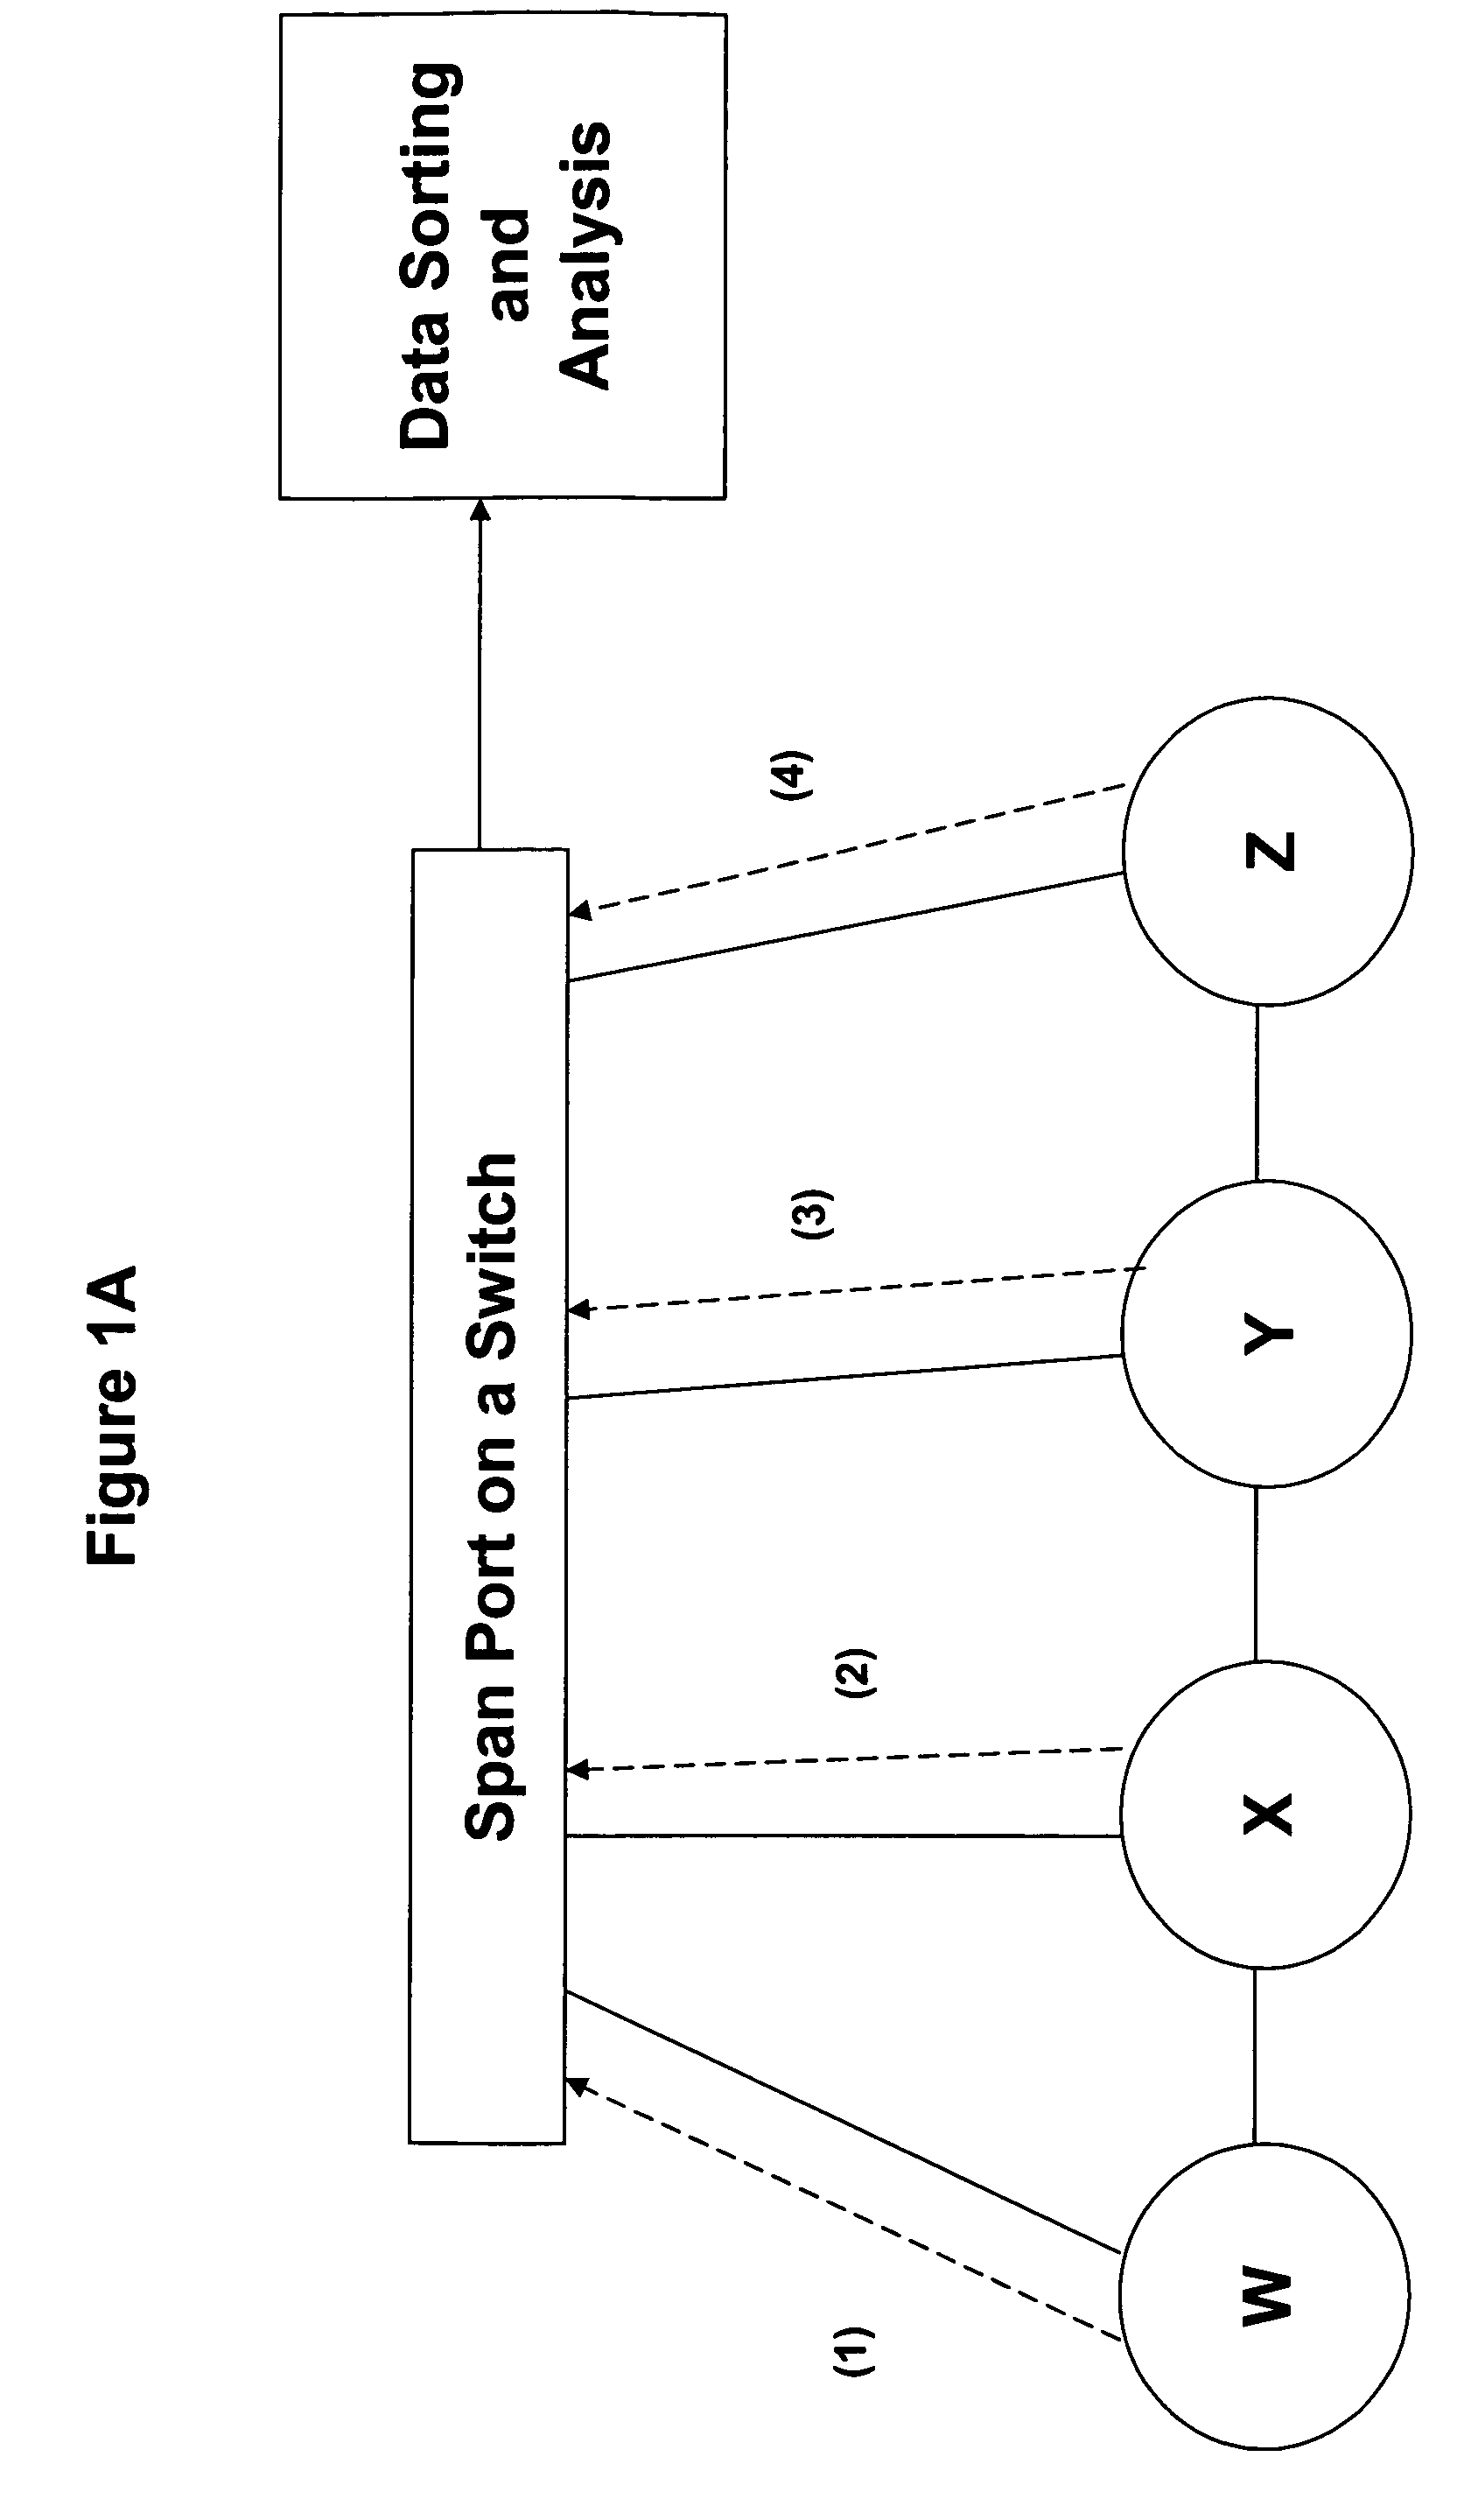 Systems and methods for detecting a compromised network